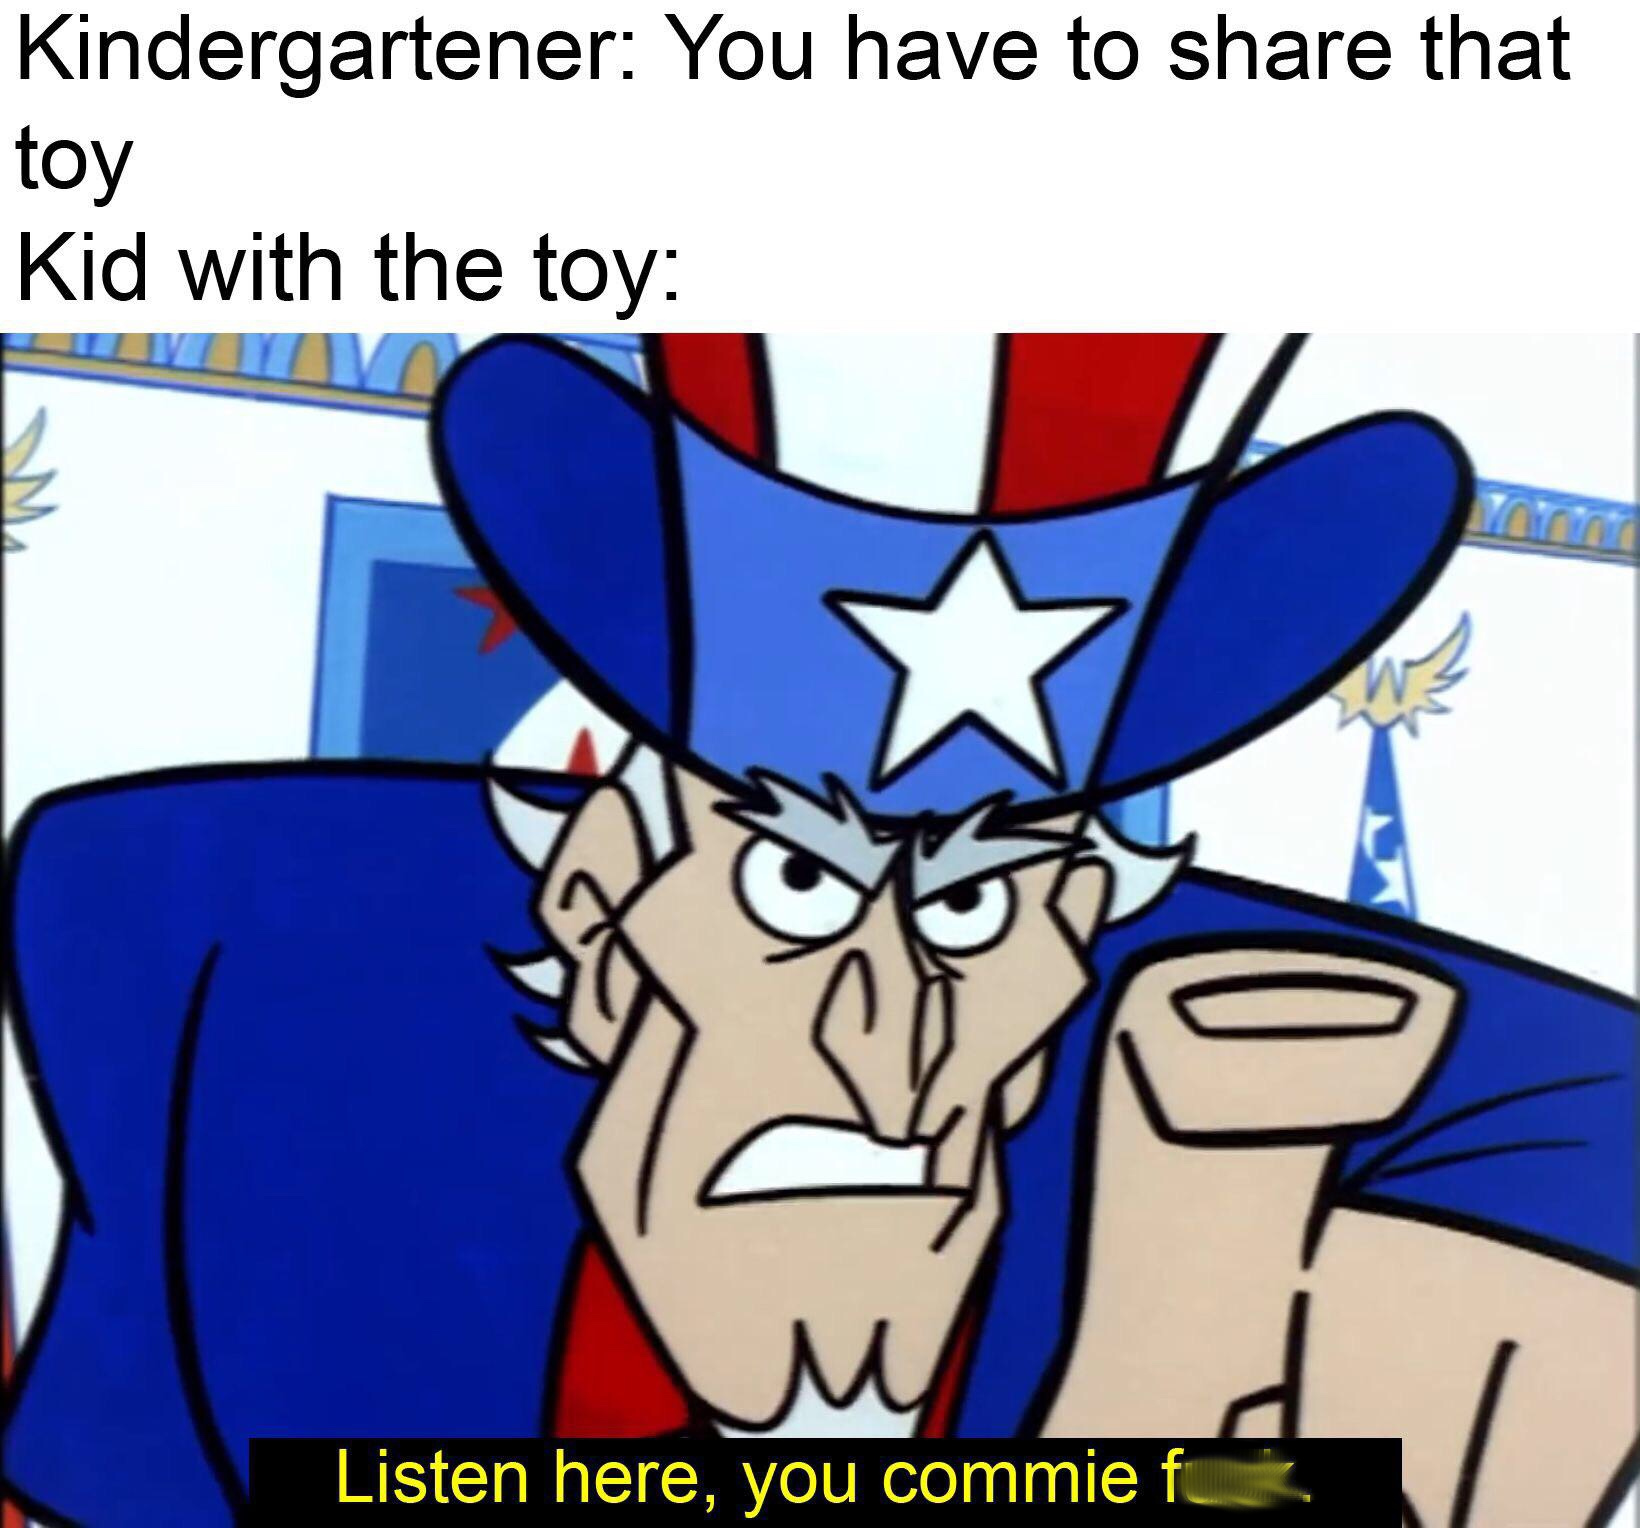 listen here you commie fuck - Kindergartener You have to that toy Kid with the toy Listen here, you commie